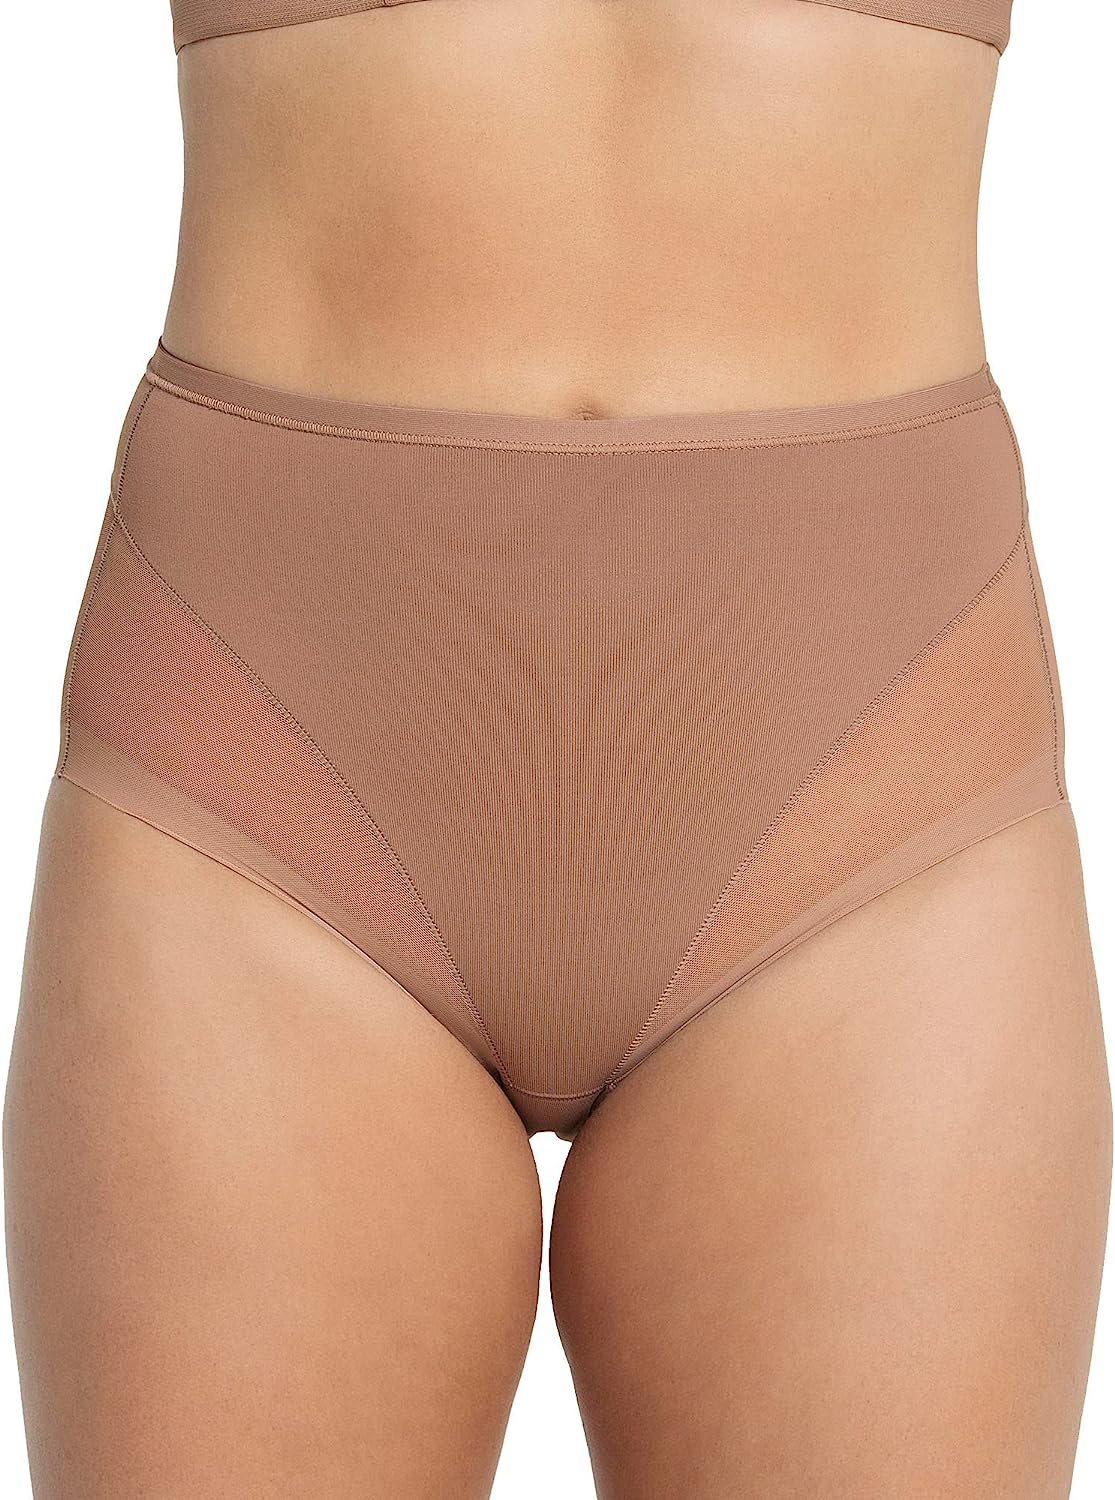 $7/mo - Finance Leonisa Invisible High Waisted Tummy Control Lace Underwear  for Women Butt Lifter Effect